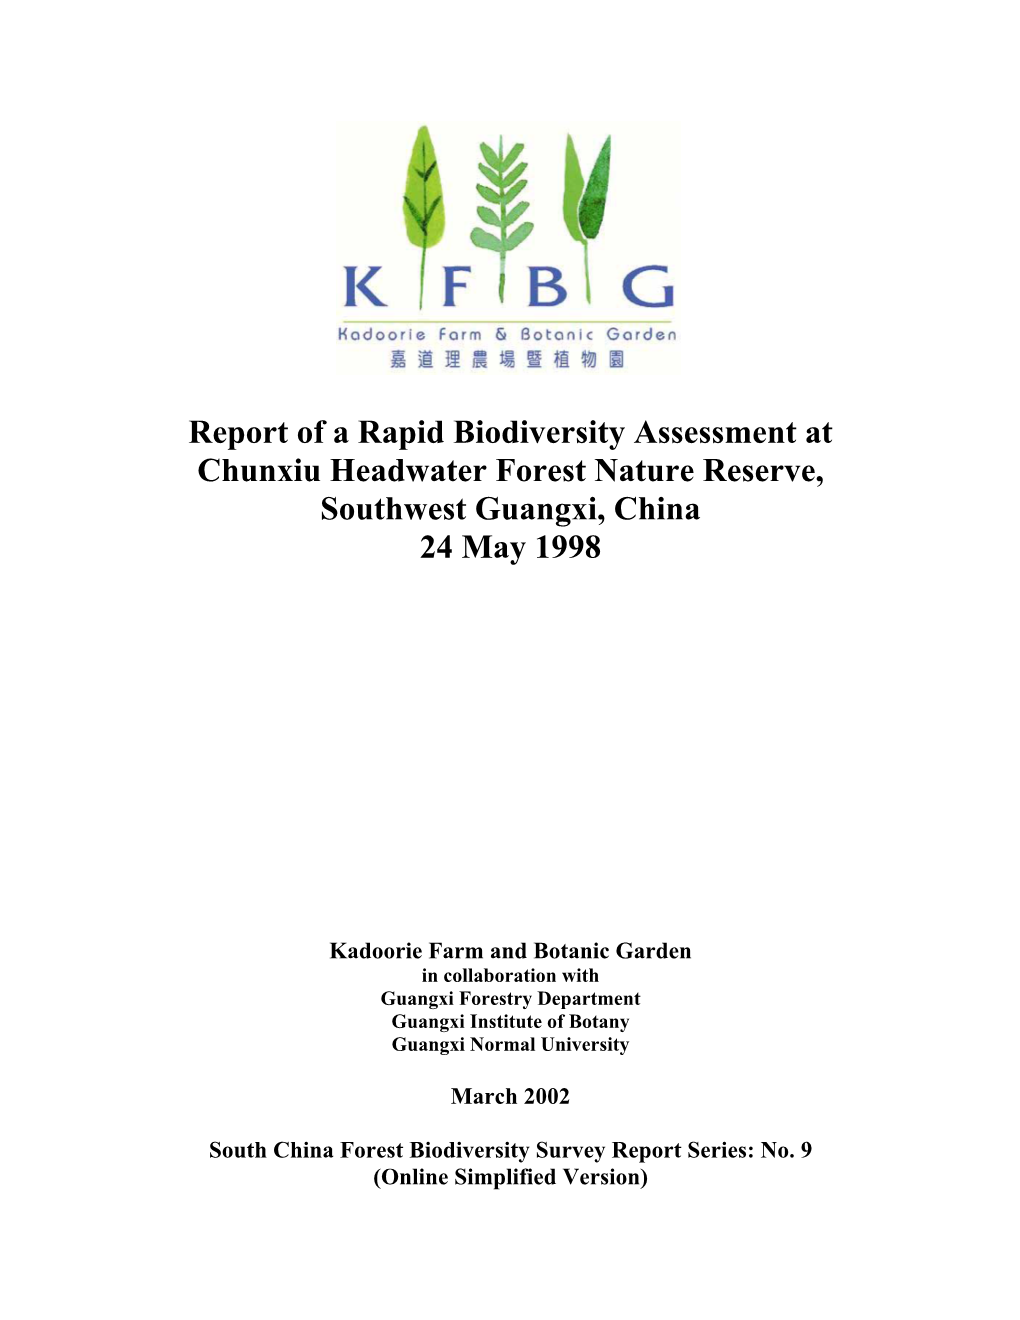 Report of a Rapid Biodiversity Assessment at Chunxiu Headwater Forest Nature Reserve, Southwest Guangxi, China 24 May 1998